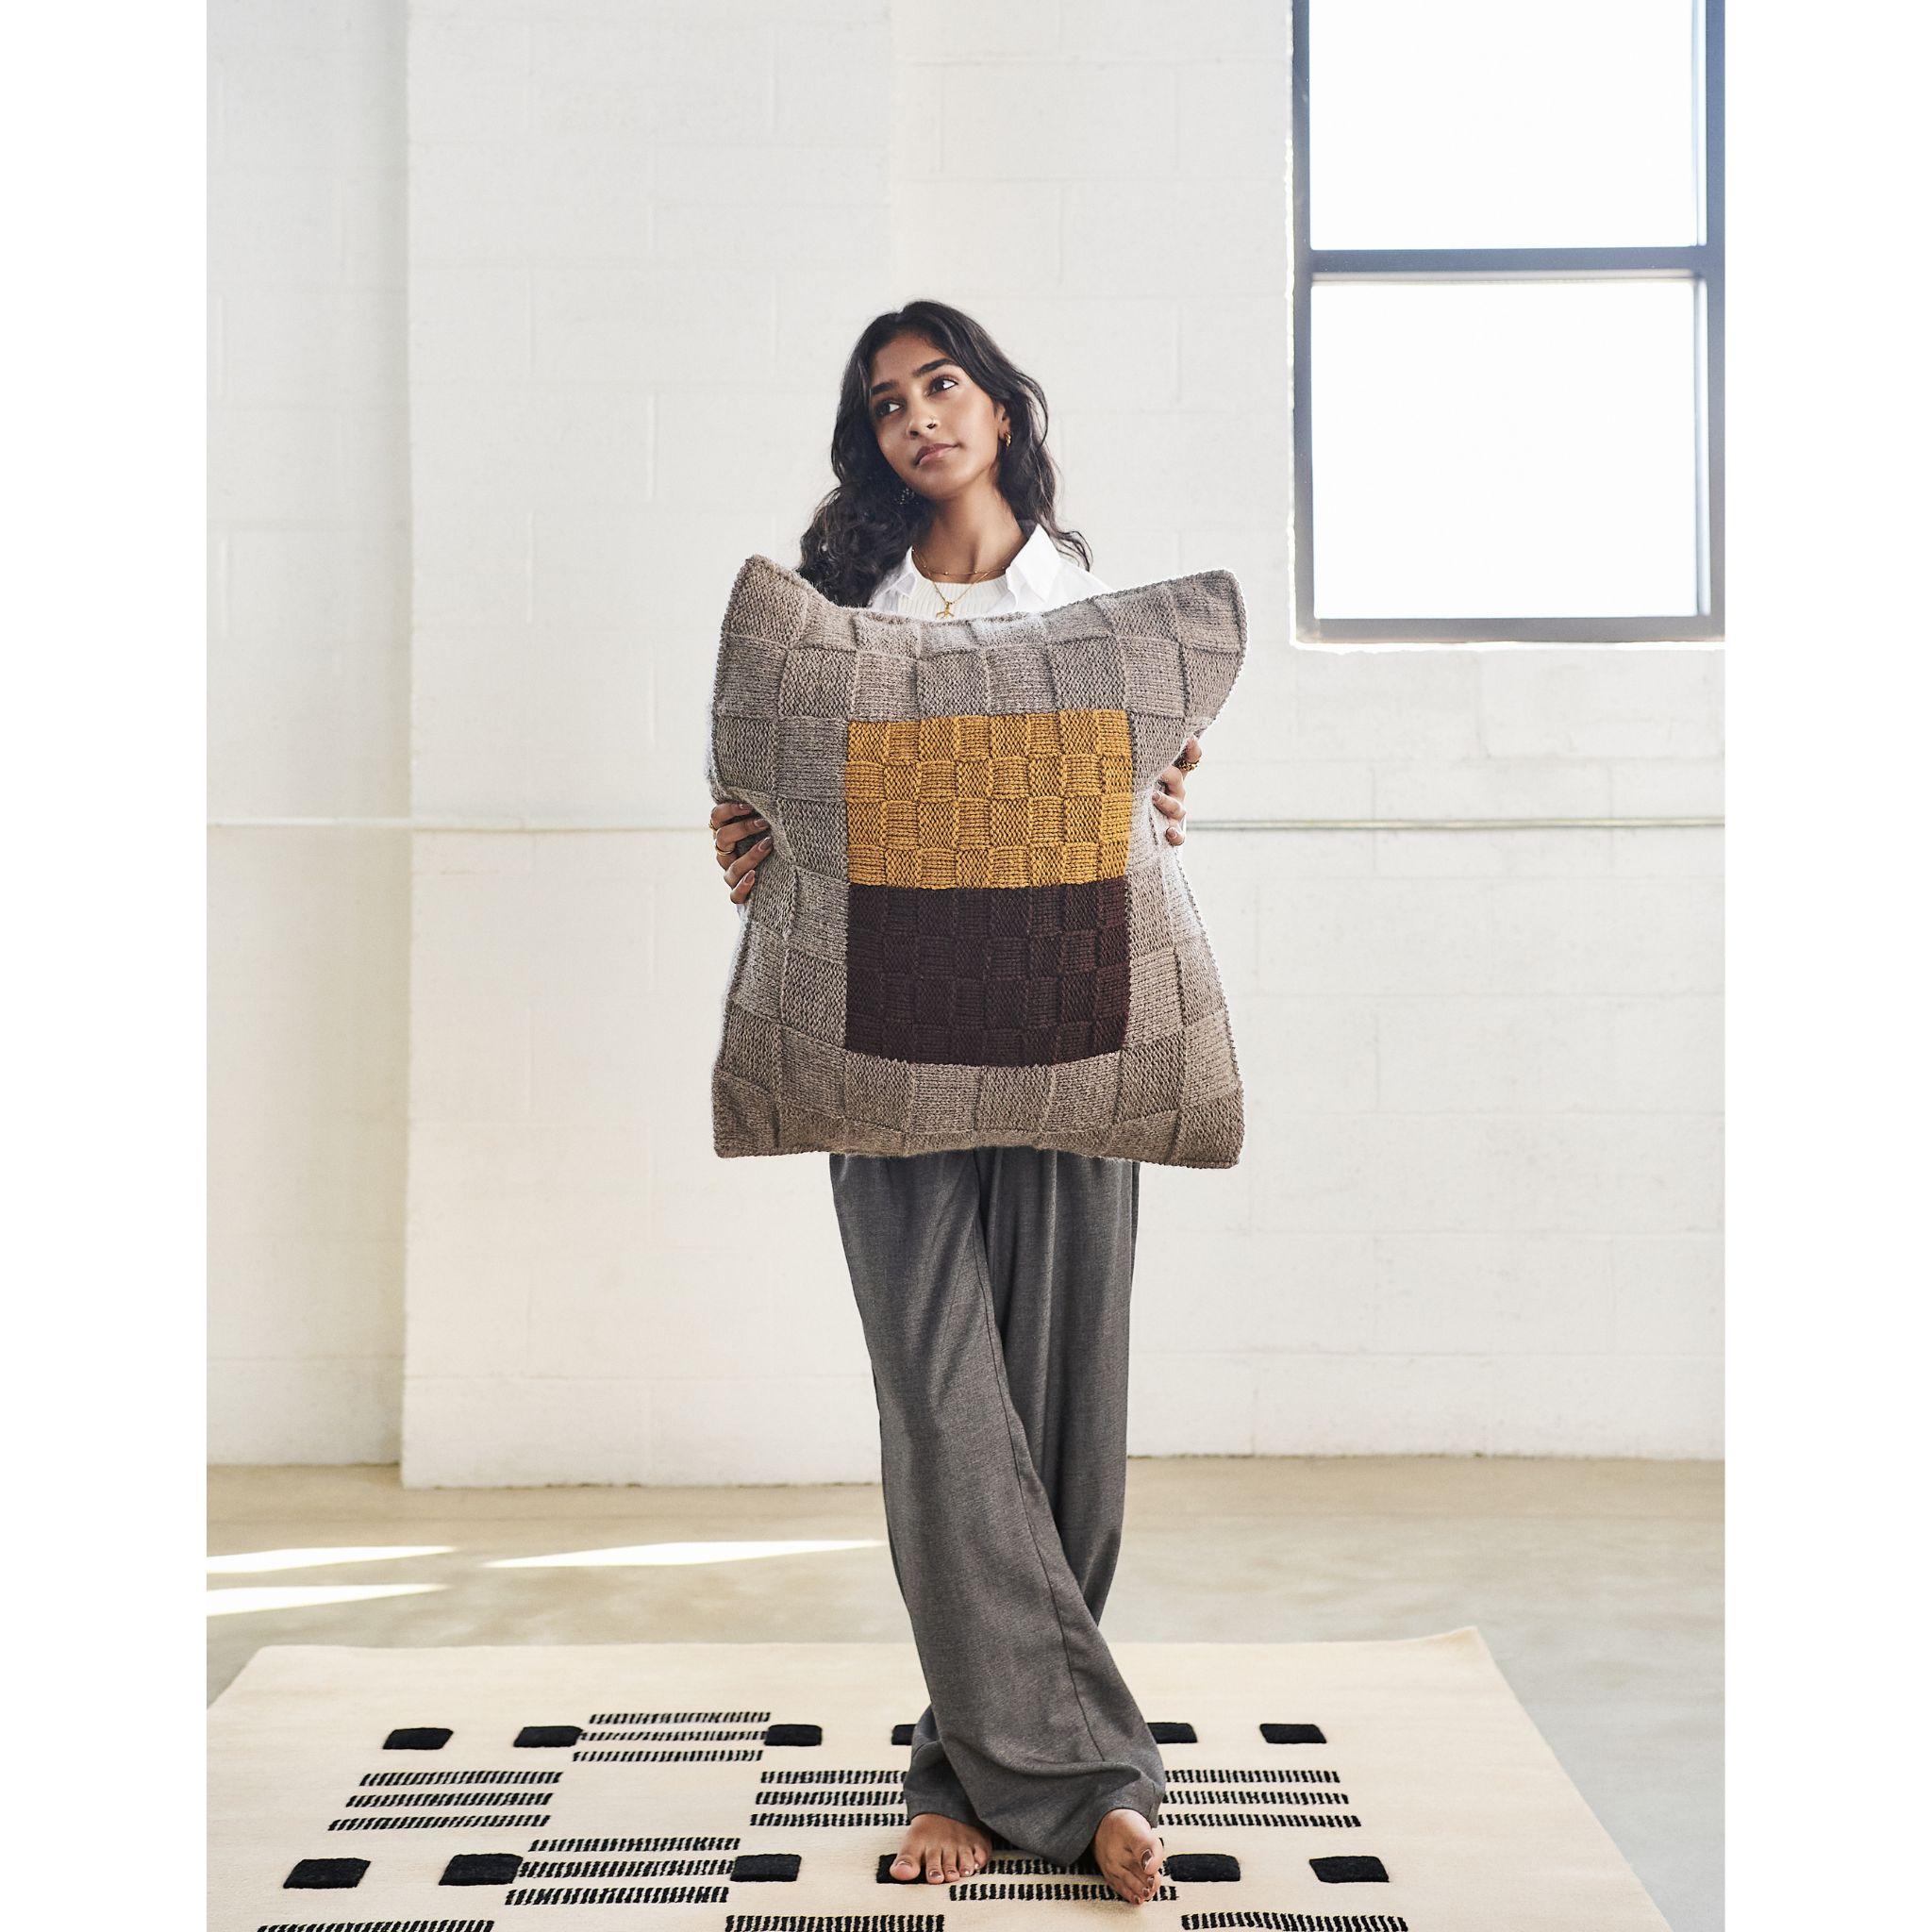 Andes is the fruit of an intentional collaboration with an artisan cluster in Peru. Hand knitted only by women, these artisans are trained specially to develop this classic design by Studio Variously.

Pure softest wool from Peru ( oeko tex